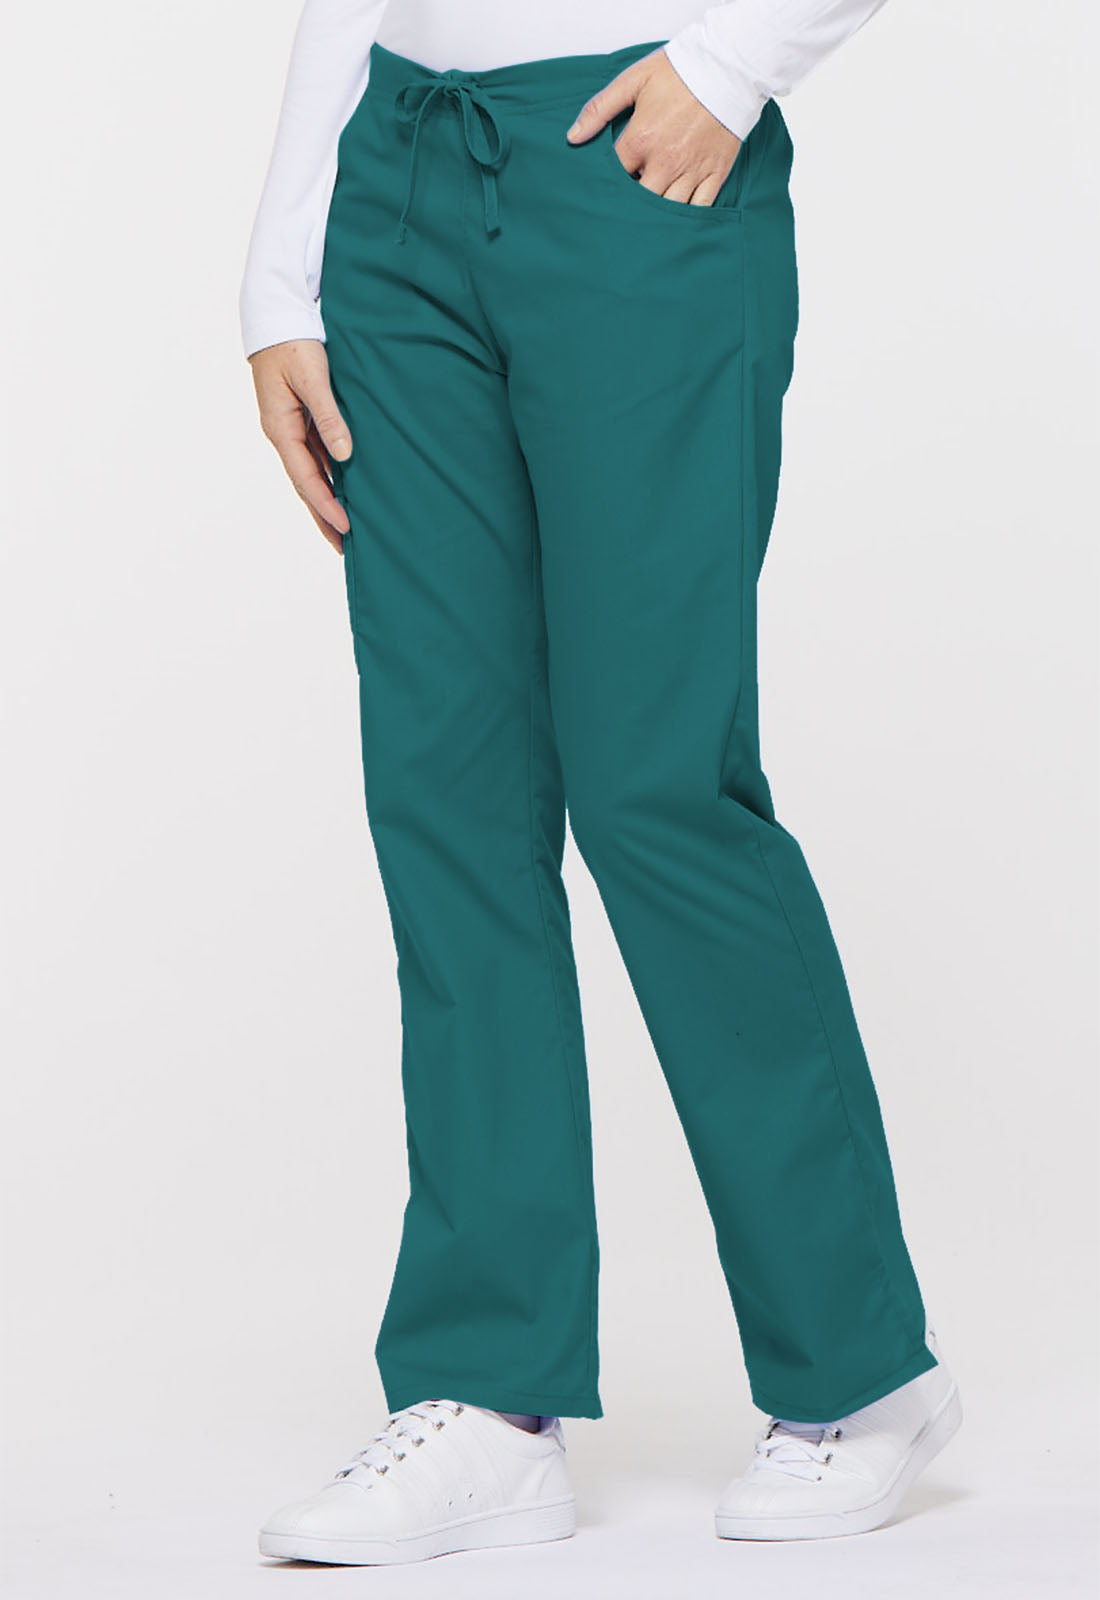 Exist. Conjunto Mujer Dickies EDS Signature Mod.85906/86206 Teal